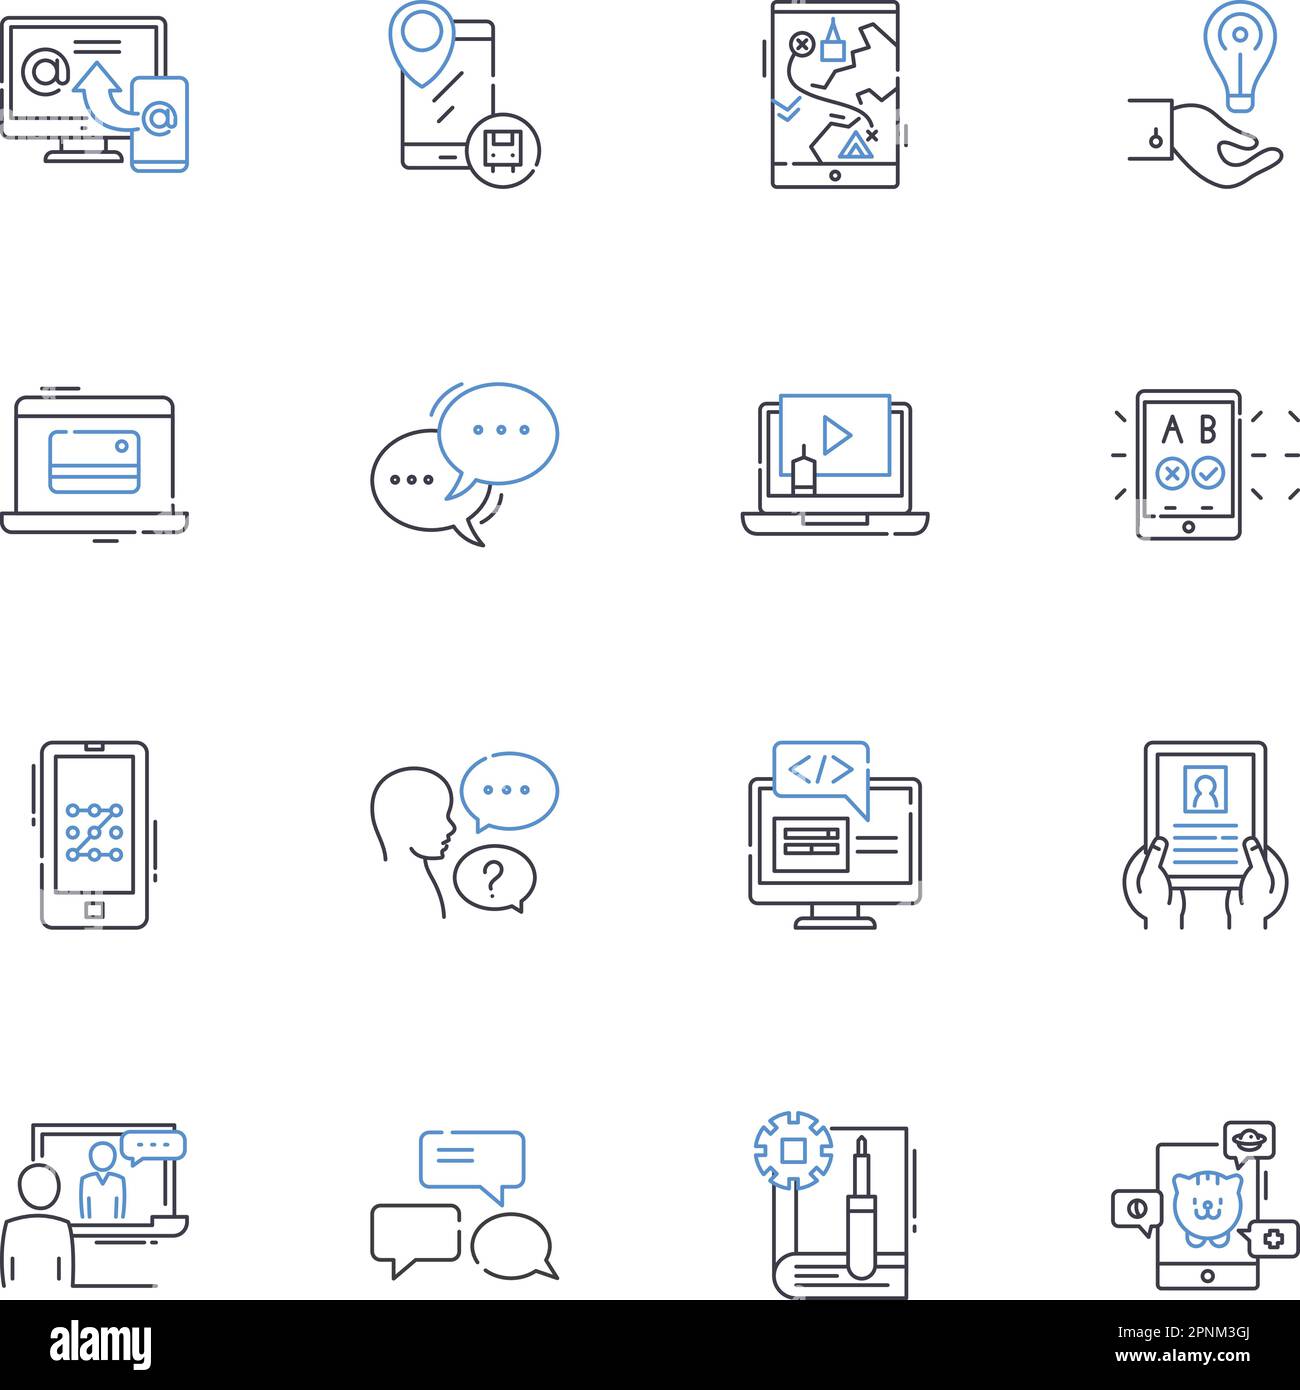 Marketing research line icons collection. Insights, Surveys, Data, Analysis, Questionnaire, Sampling, Focus groups vector and linear illustration Stock Vector